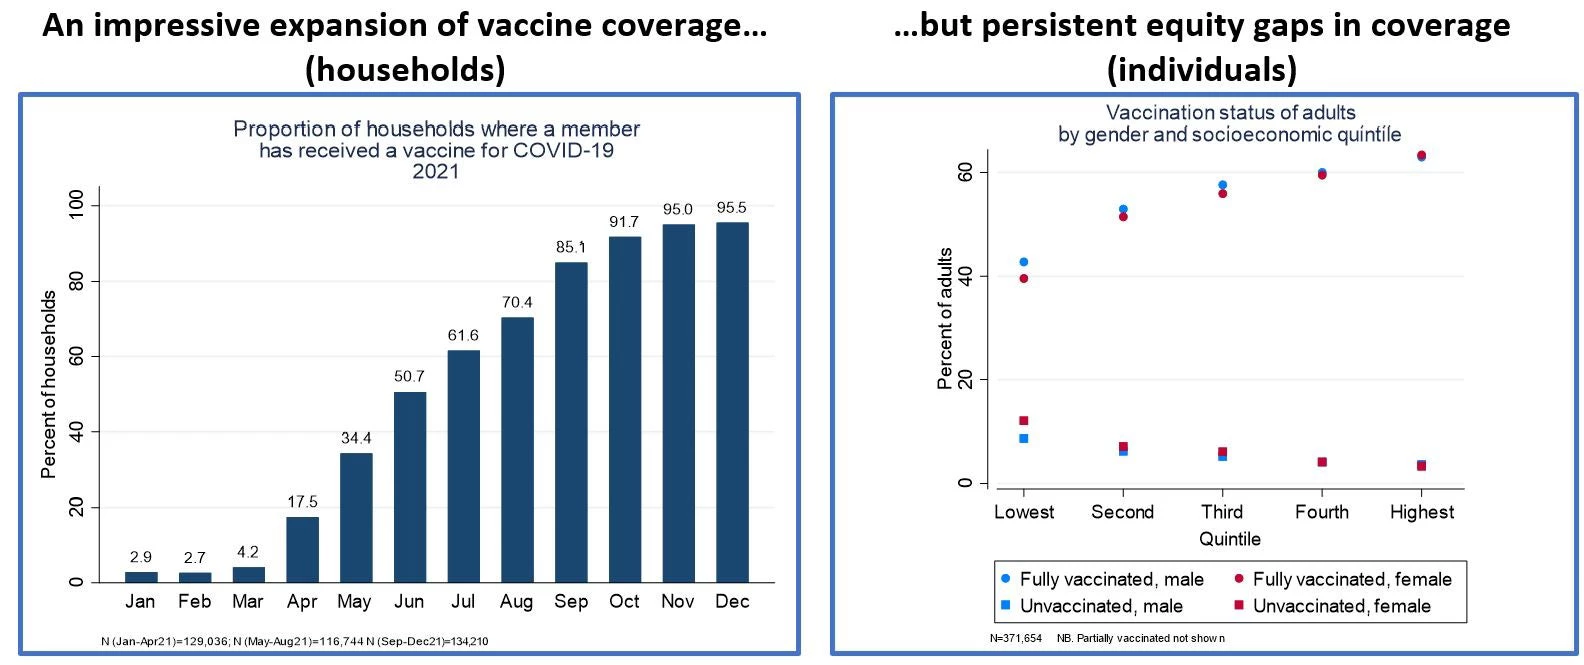 An impressive expansion of vaccine coverage (households) but persistent equity gaps in coverage (individuals)